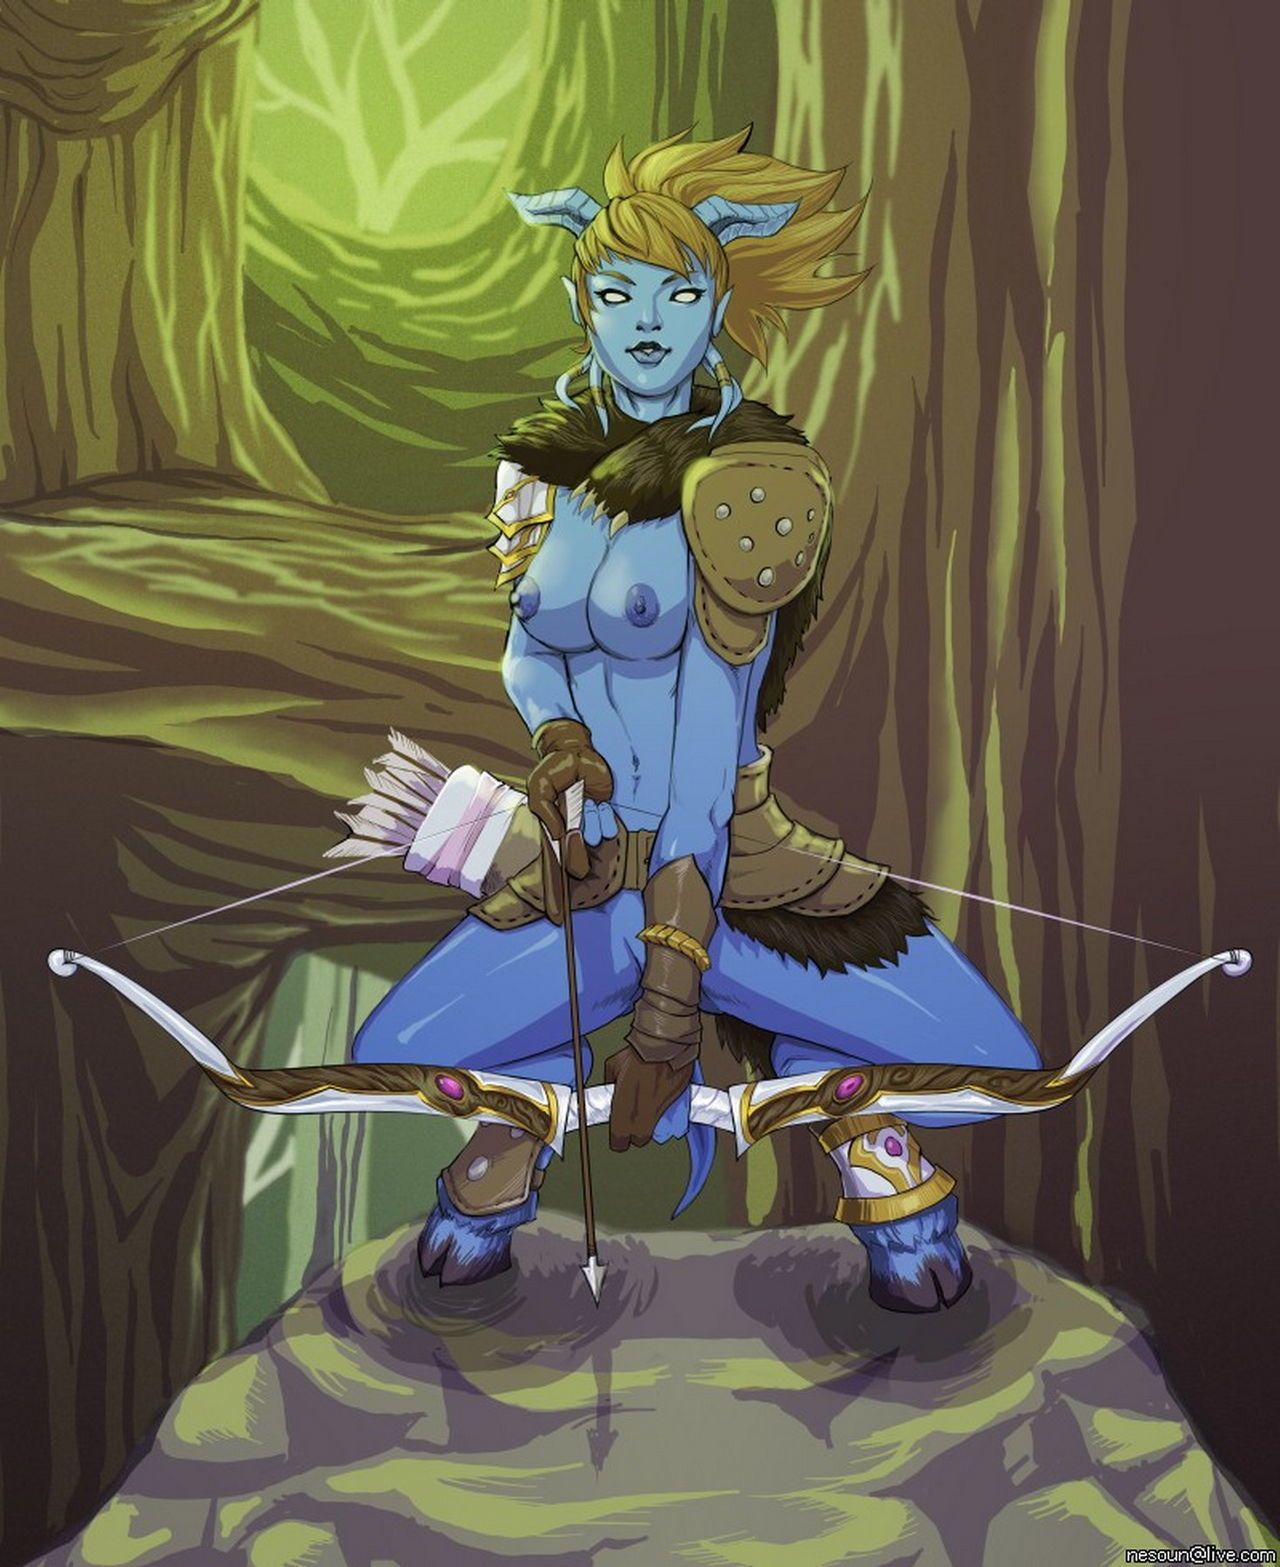 World of Warcraft Art Collection - part 20